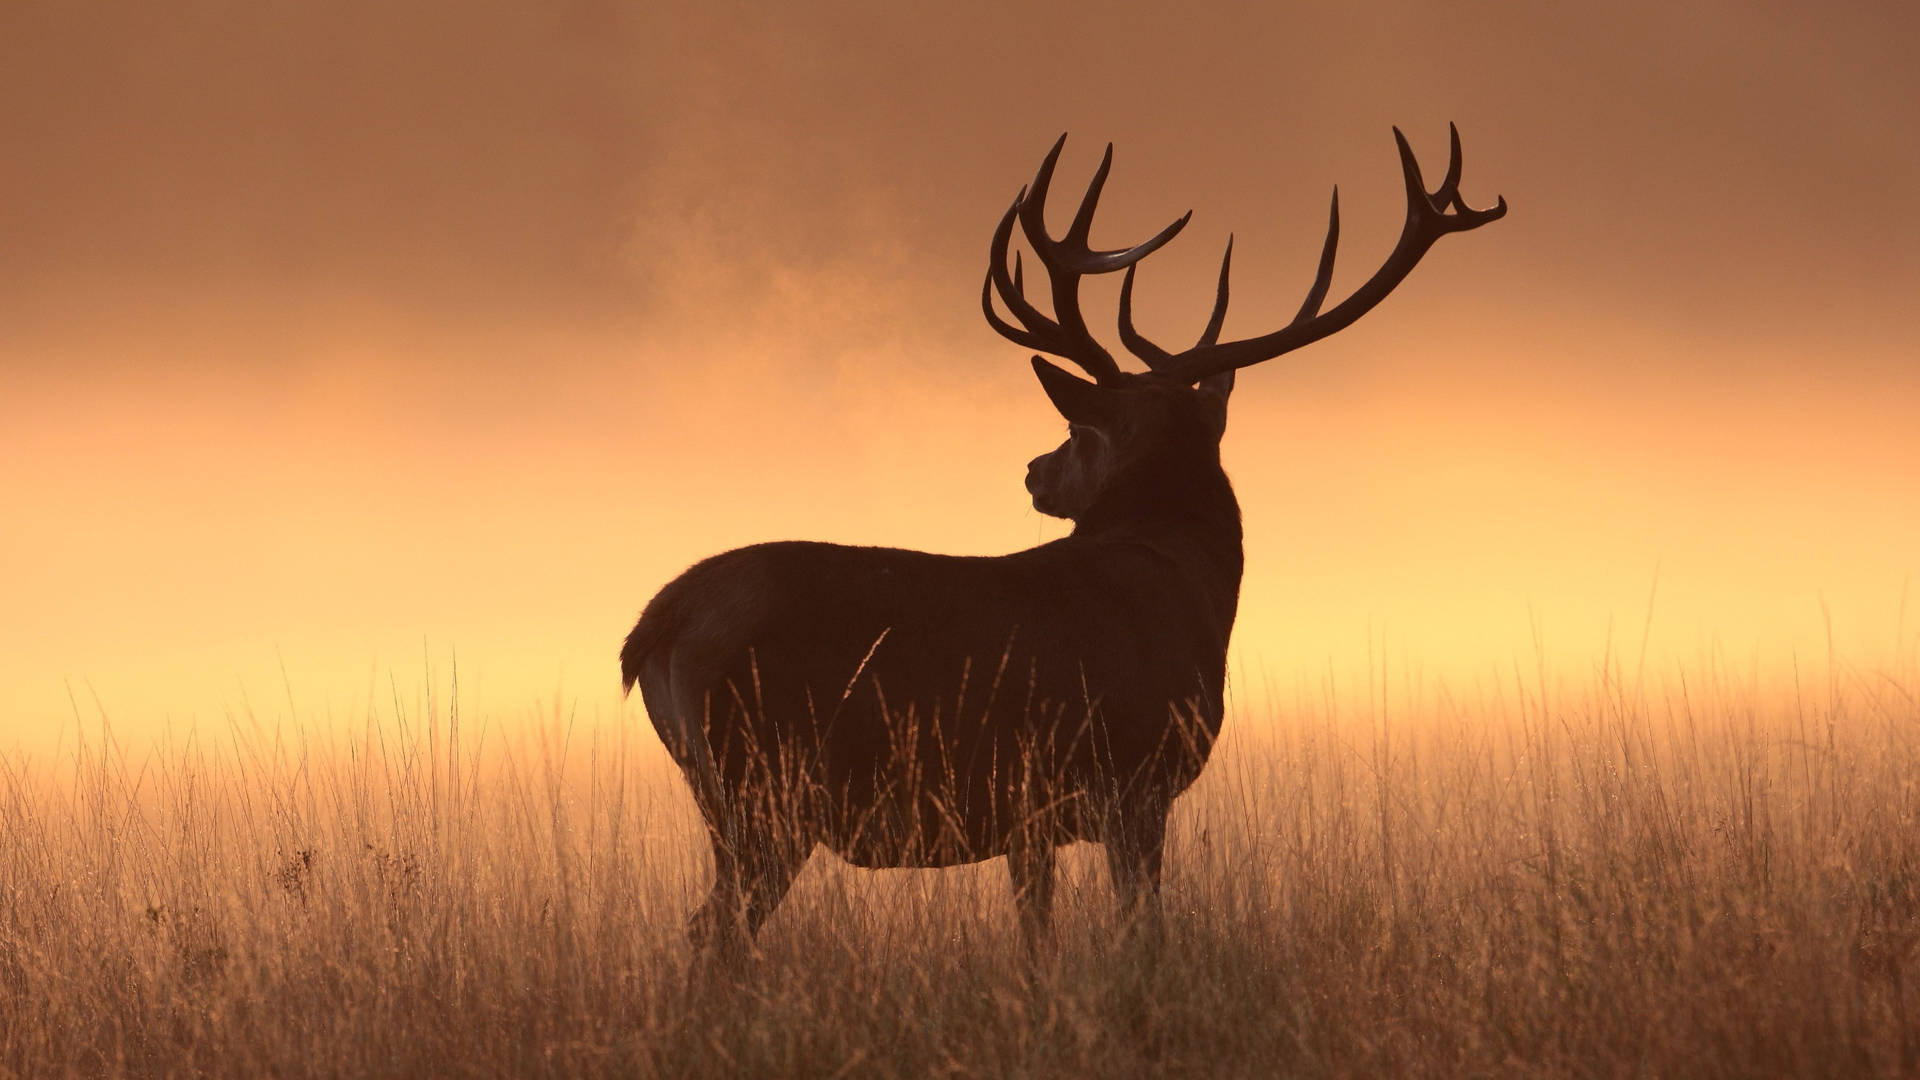 A Stunning Silhouette of a Majestic Deer at Sunset Wallpaper